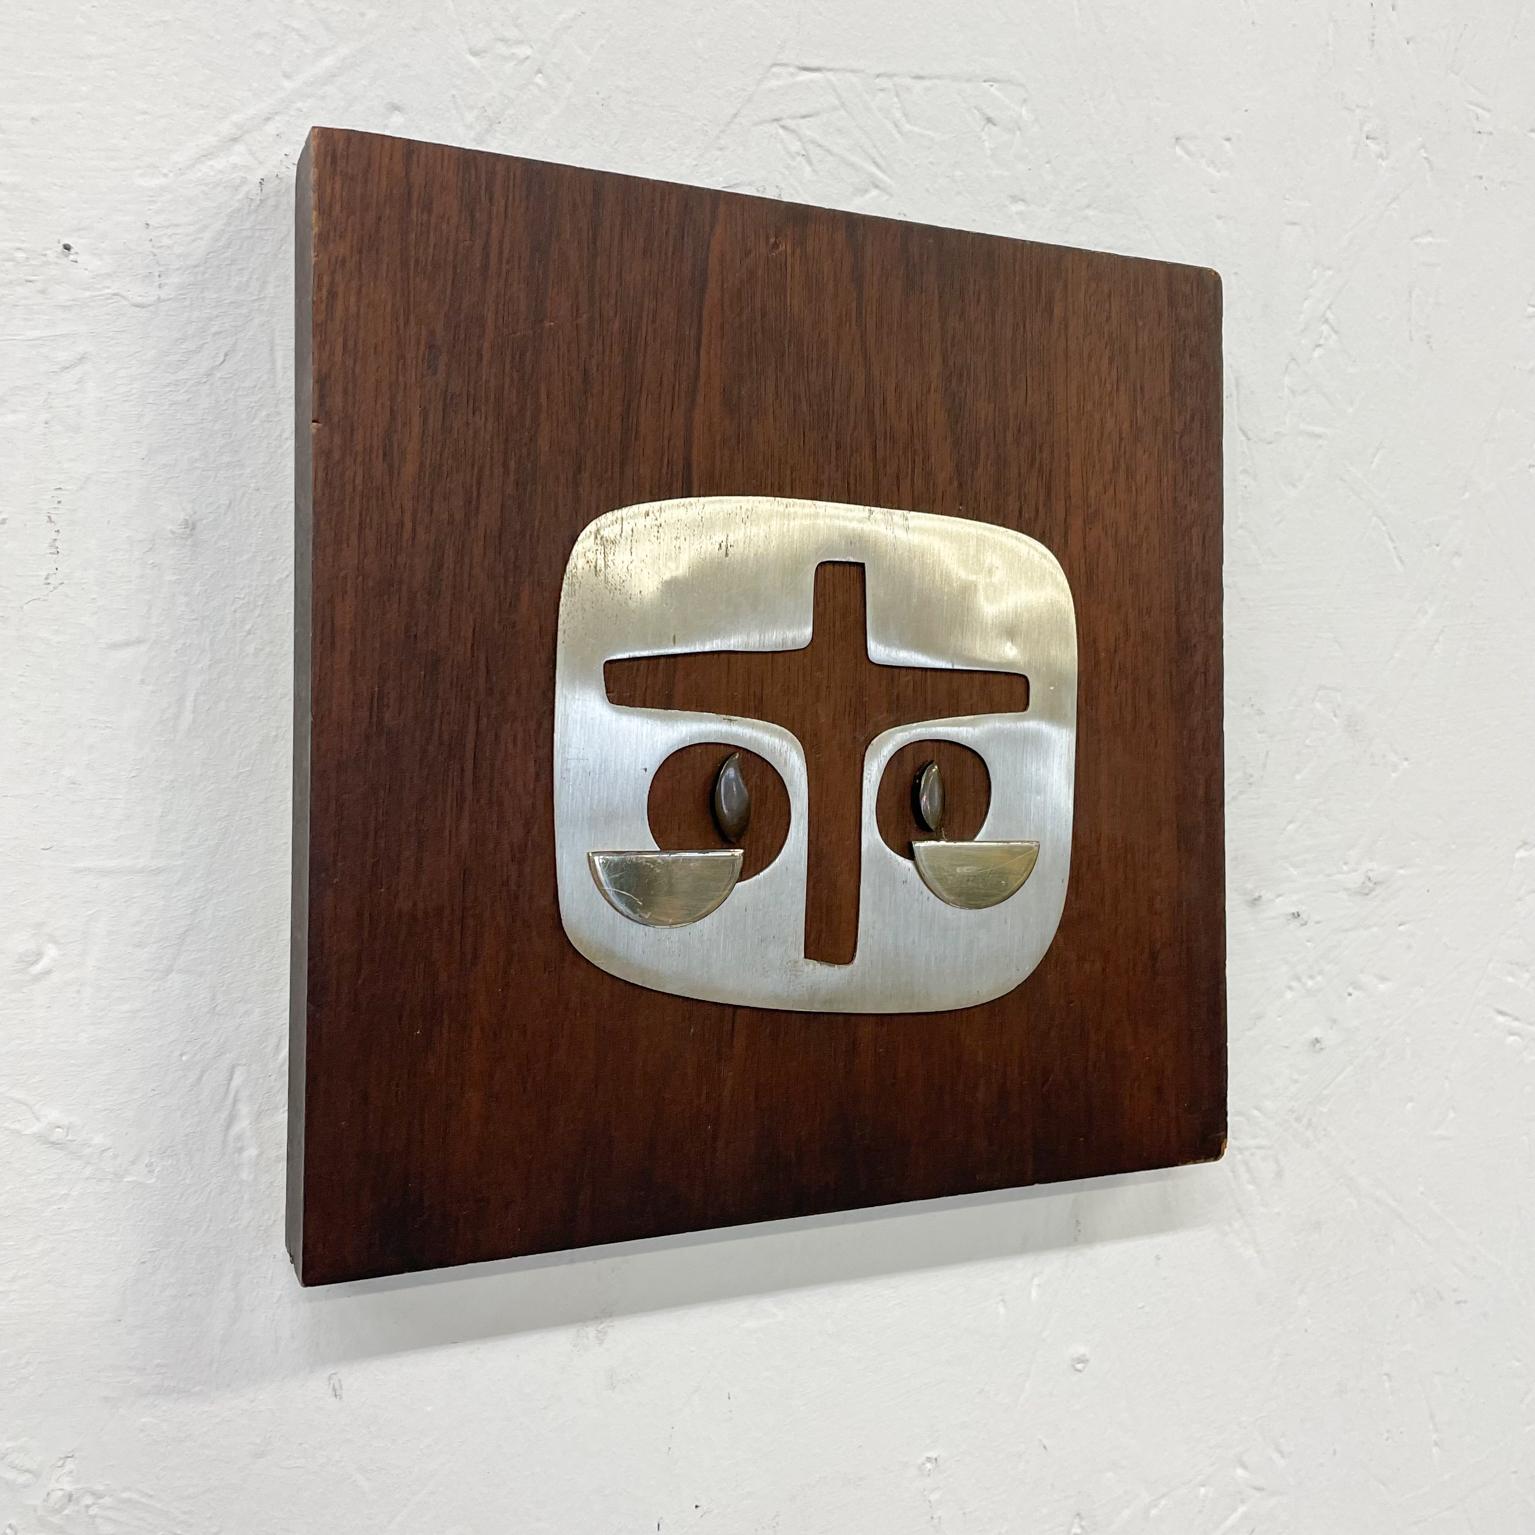 Modern Cross
1970s Vintage Abstract Wall Art Modern Cross Plaque by Emaus Benedictine Monks of Cuernavaca, Mexico 1970s Midcentury Modern.
Maker stamped
Rare oversize
7.88 w x 7.88 tall x 1 thick
Handmade in solid mahogany wood block and